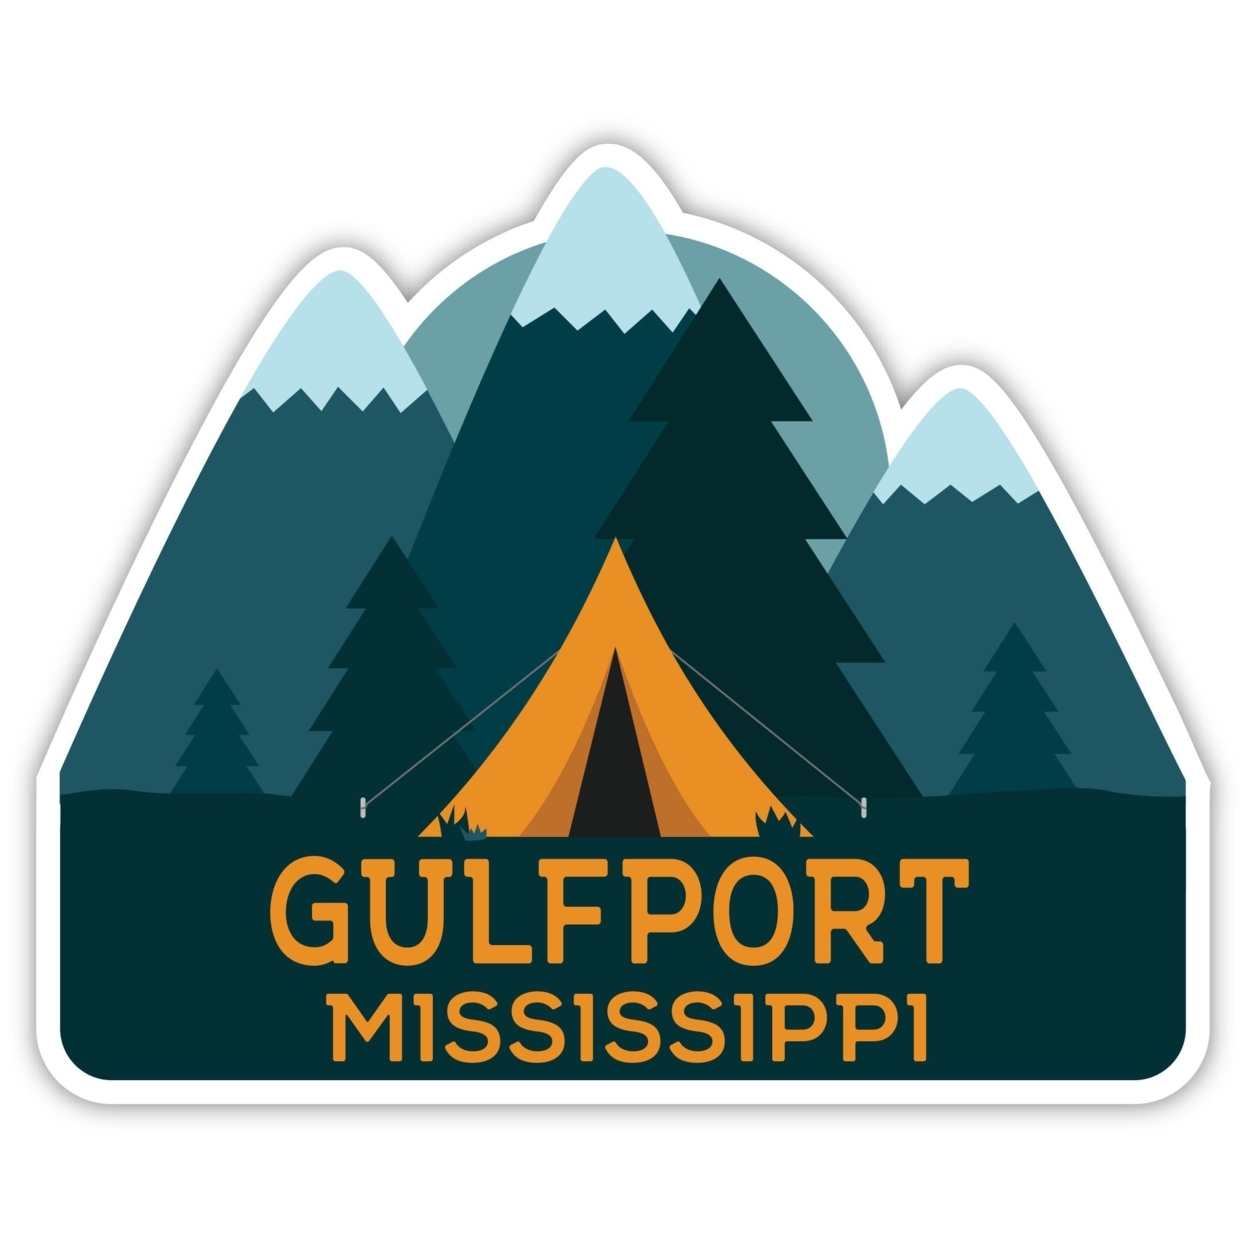 Gulfport Mississippi Souvenir Decorative Stickers (Choose Theme And Size) - 4-Pack, 10-Inch, Adventures Awaits